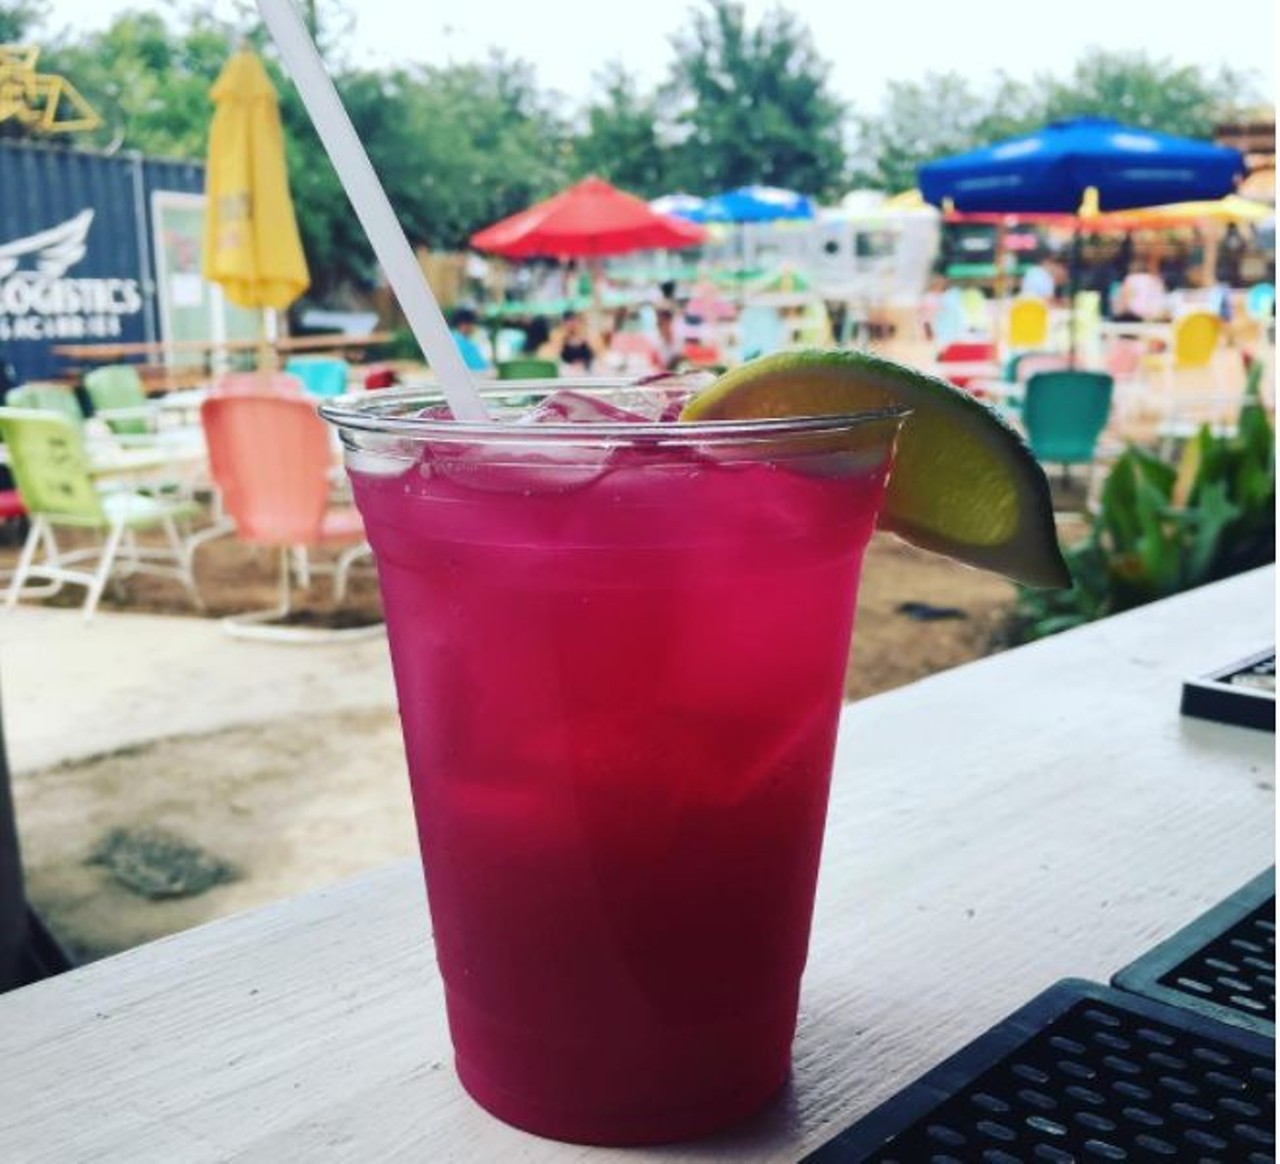 Hop around for the best happy hour deals
When it comes to keeping cool with a drink, there are several places where you stay within budget. Grab a sangria, margarita or an ice cold beer for best results.
Photo via Instagram, burlesonyardbeergarden
